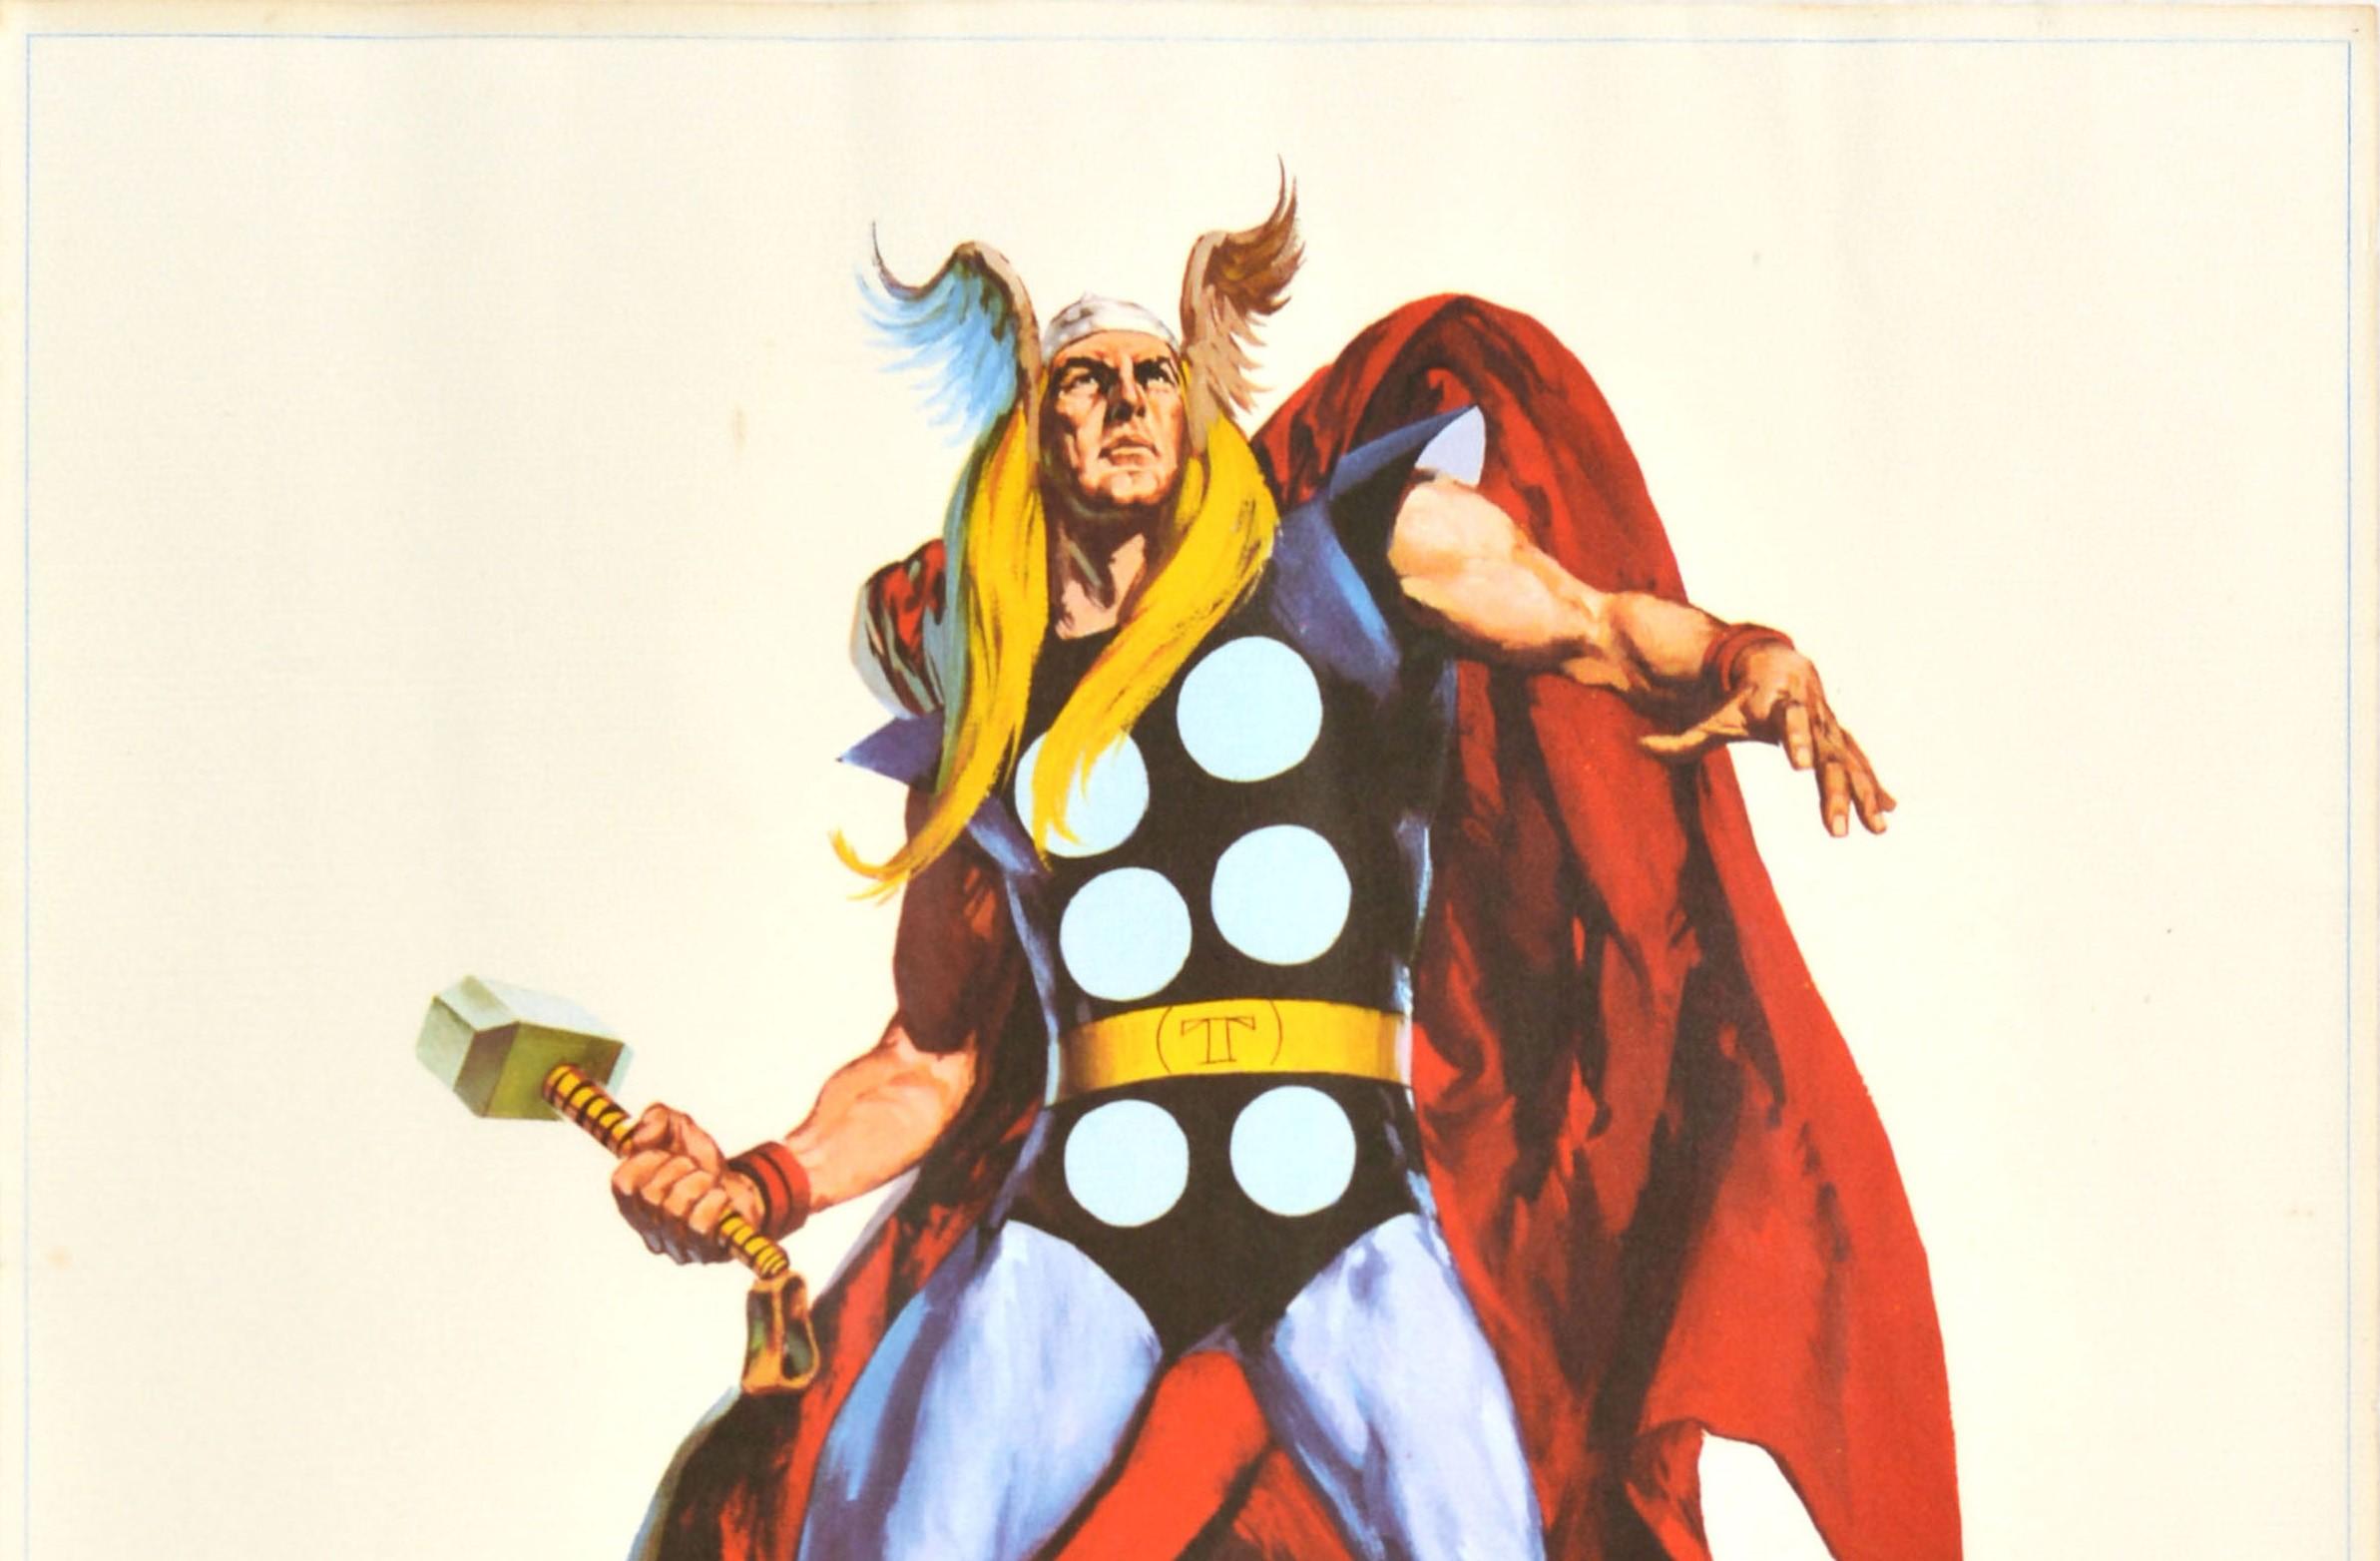 Original vintage animated action adventure movie poster featuring the Marvel Comics superhero Thor wearing his winged helmet and red cape and holding a heavy hammer in one hand, the title in bold green text below. Created by cartoon artist Jack